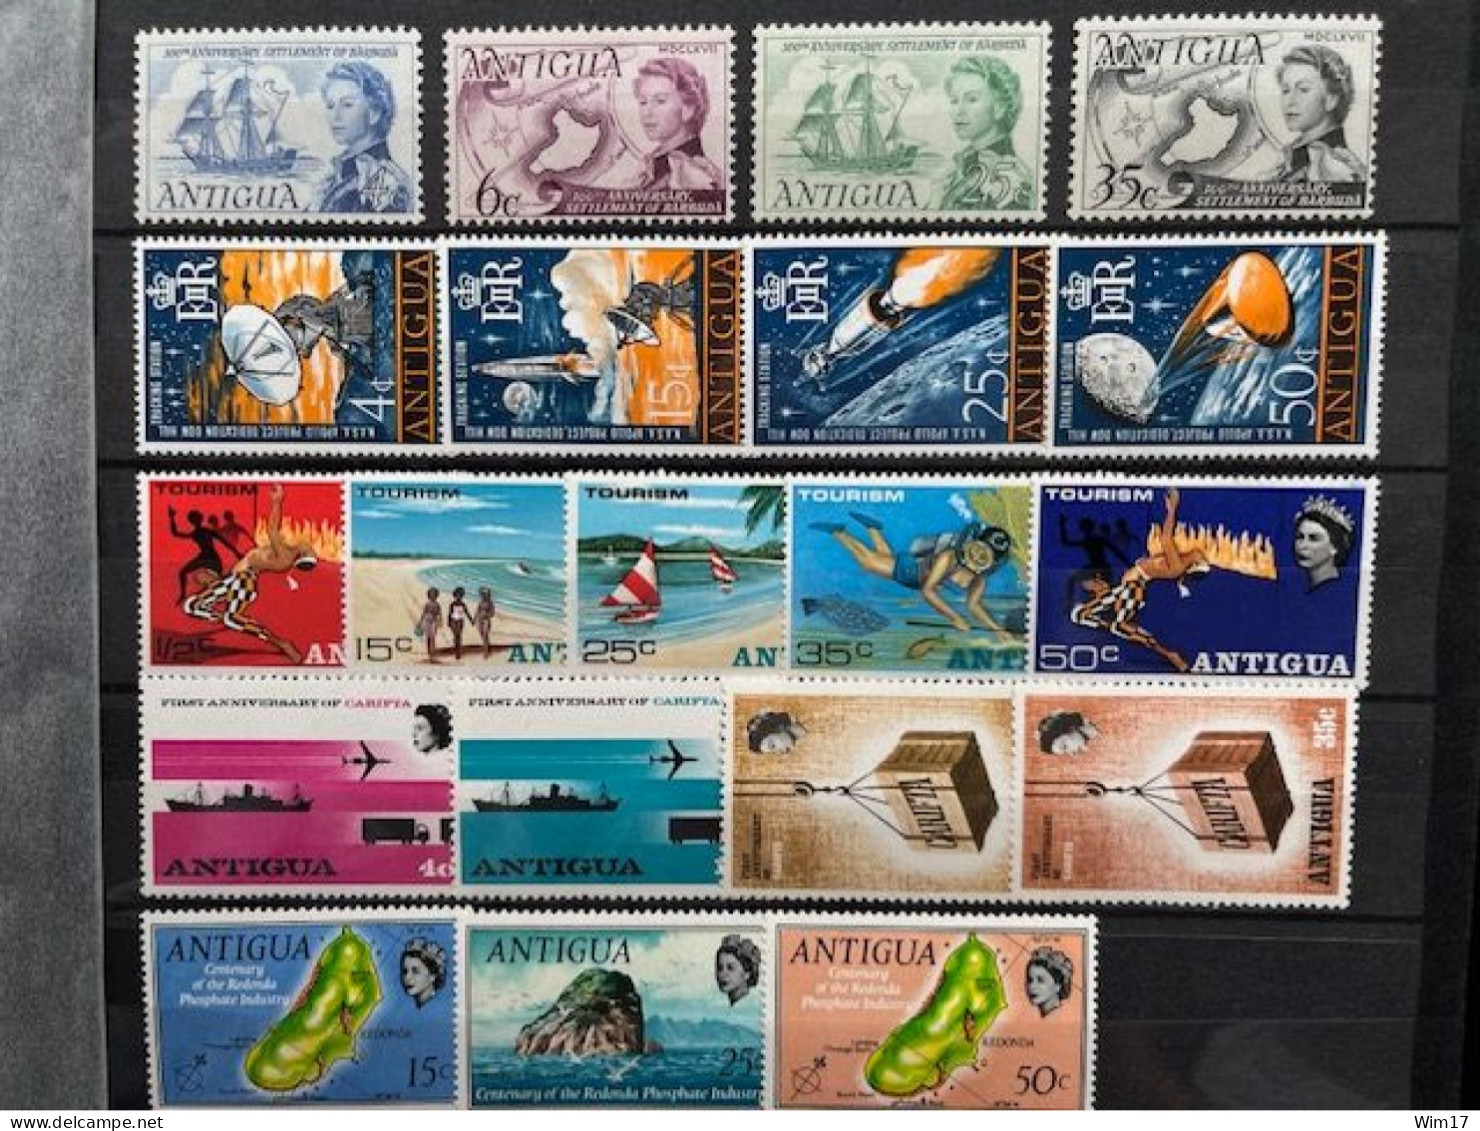 ANTIGUA LOT OF 39 STAMPS (34 STAMPS MNH/5 STAMPS HINGED) - 1960-1981 Autonomia Interna